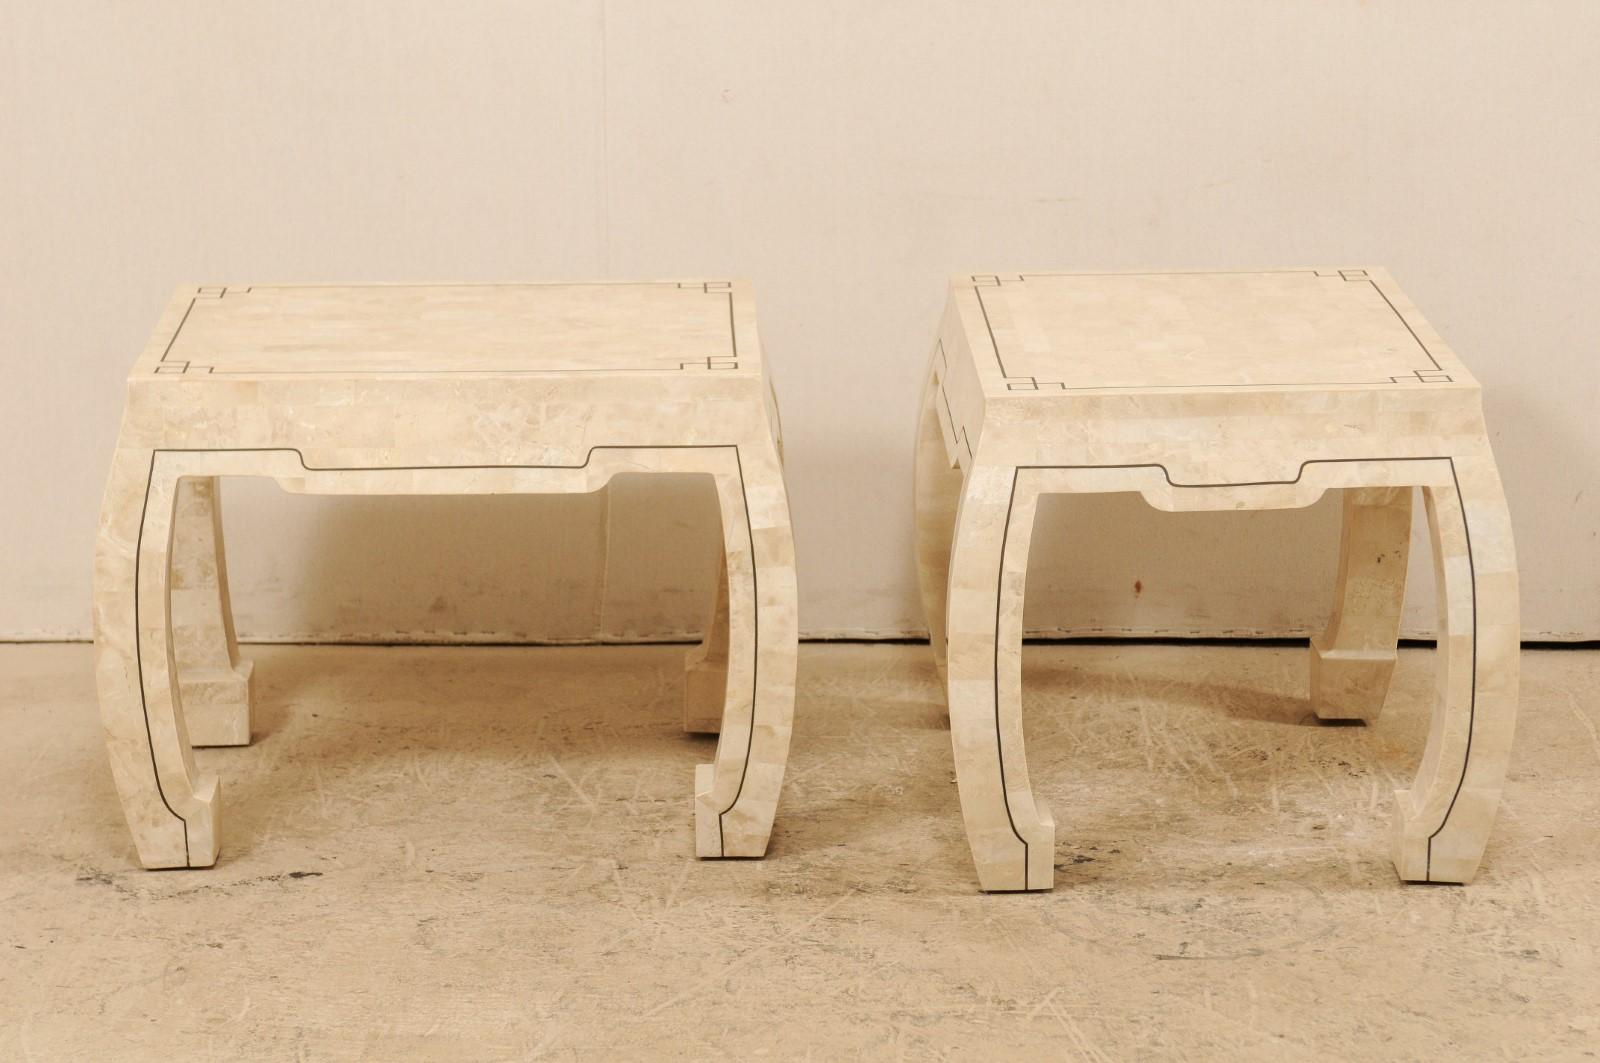 A pair of modern designed side tables attributed to Maitland-Smith, circa 1980s. These vintage tables feature a neutral colored tessellated stone mosaic patterned veneer of rectangular-shaped pieces, each having a slightly different color than the